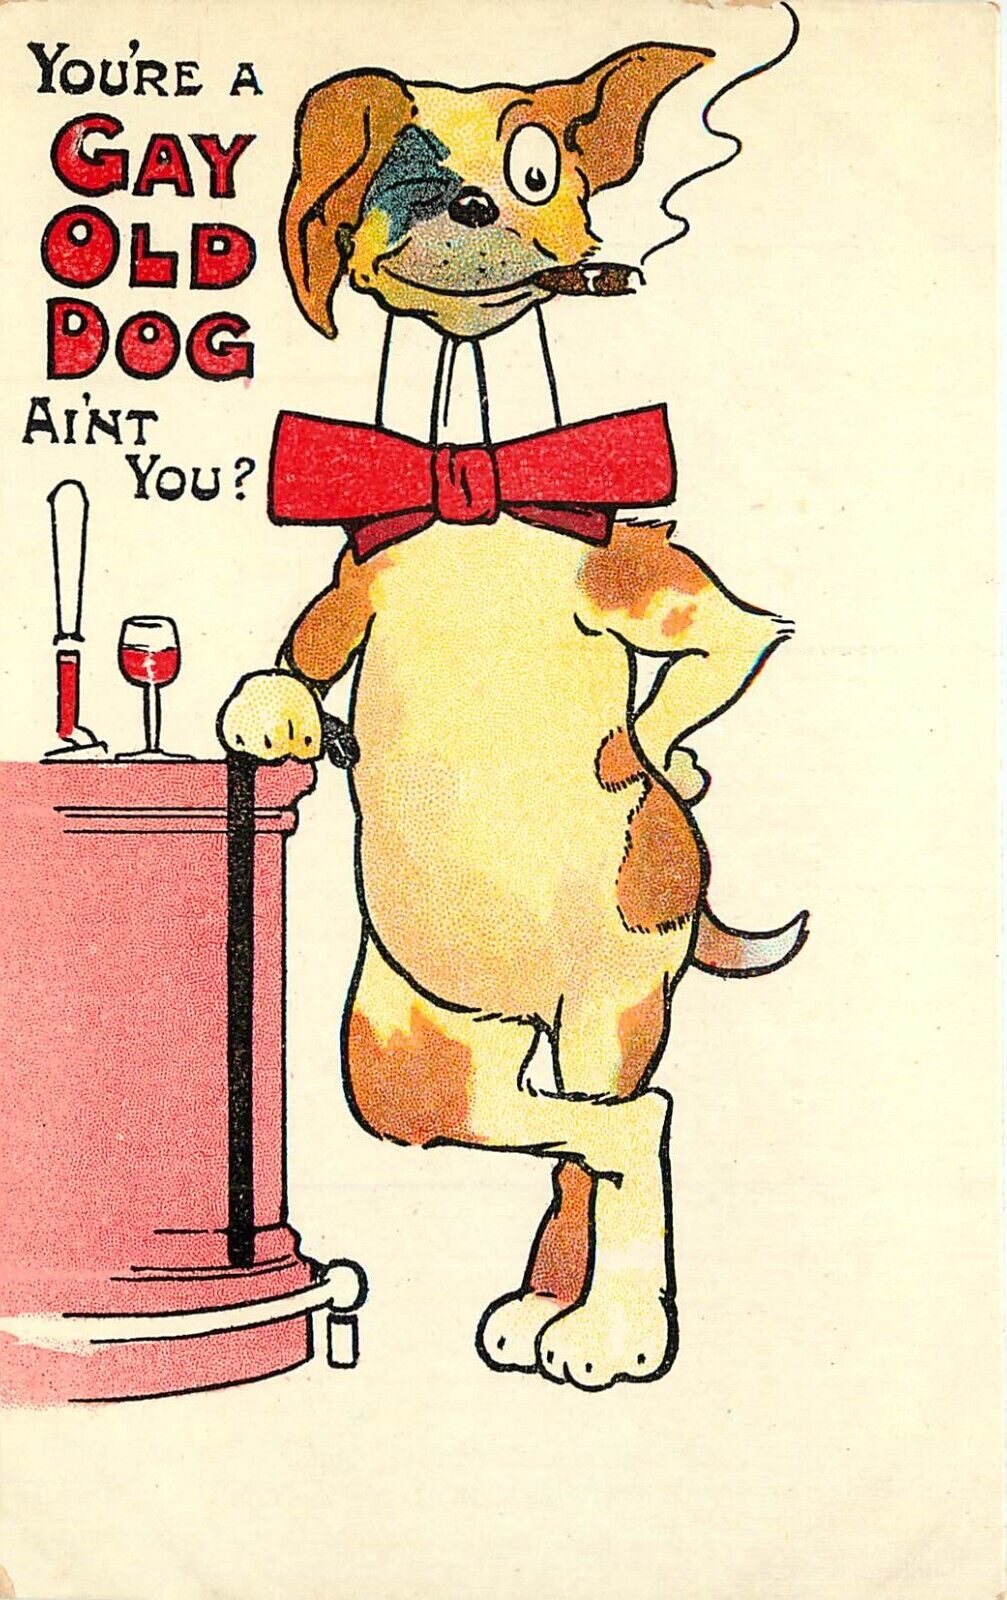 Dog With Bow Tie and Glass Of Wine Postcard You're a Gay Old Dog Aren't You